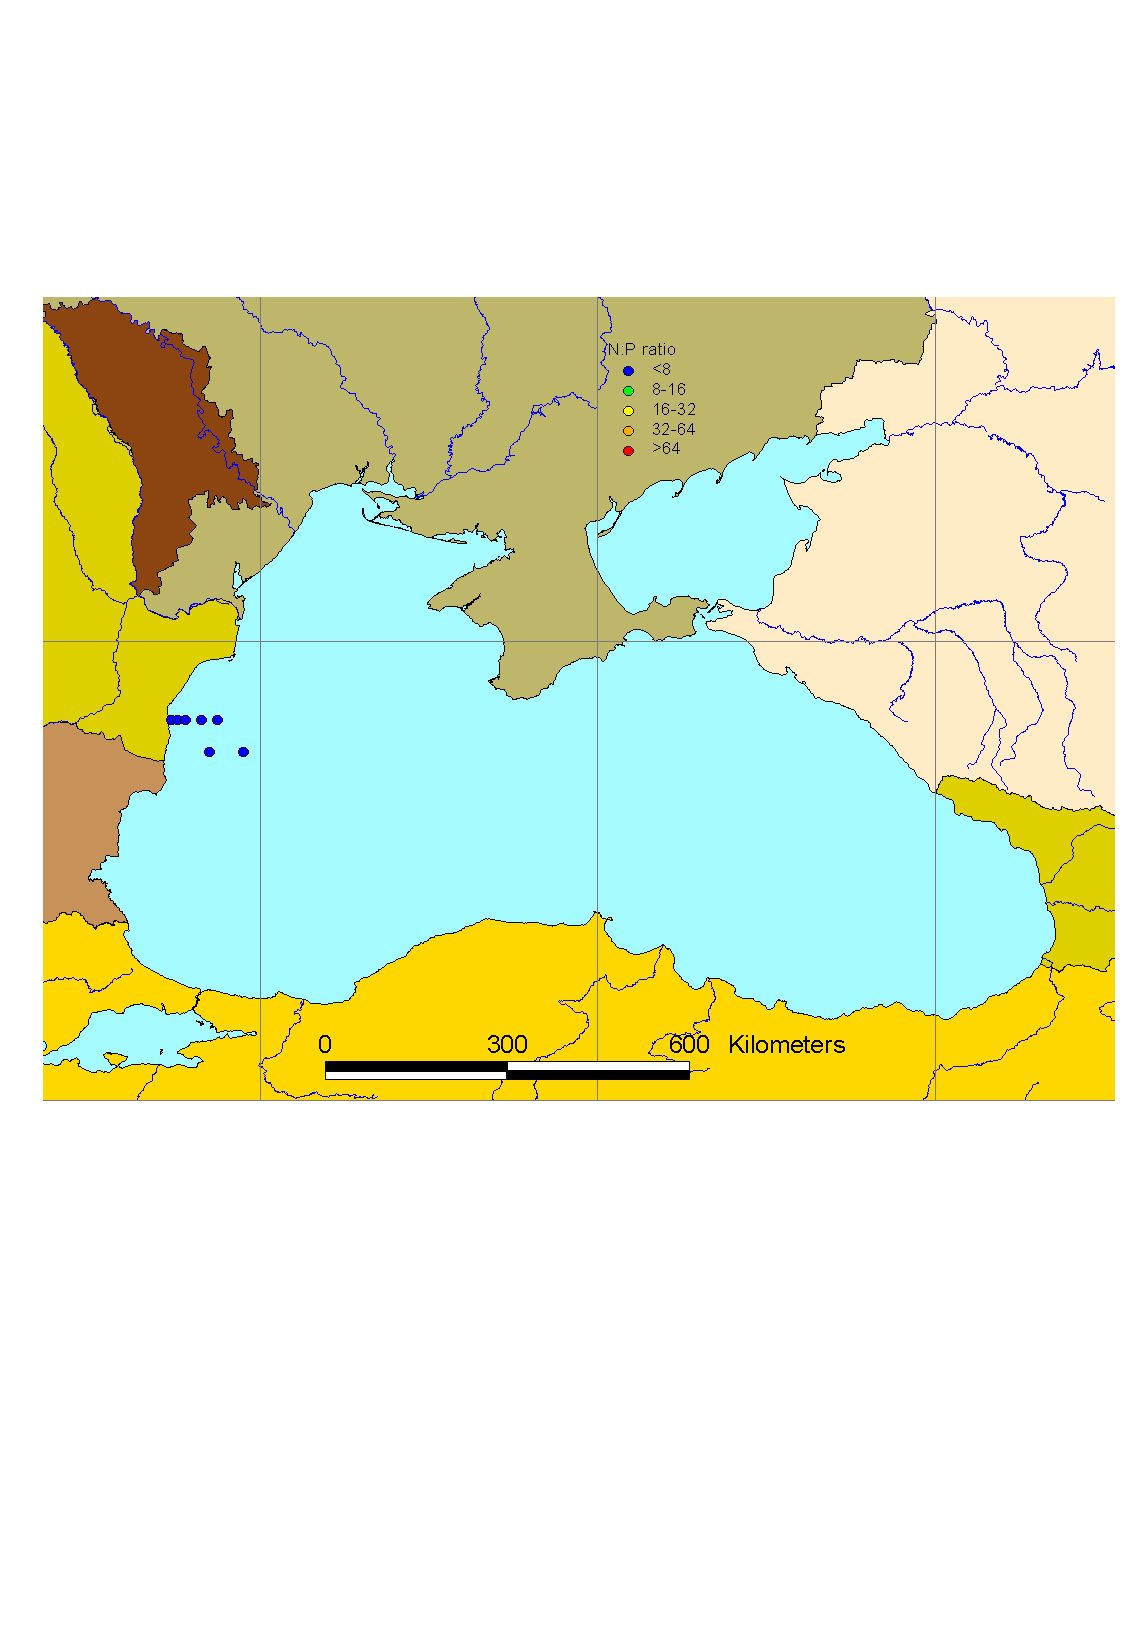 Mean winter surface nitrate/phosphate-ratio in the Black Sea, 2003